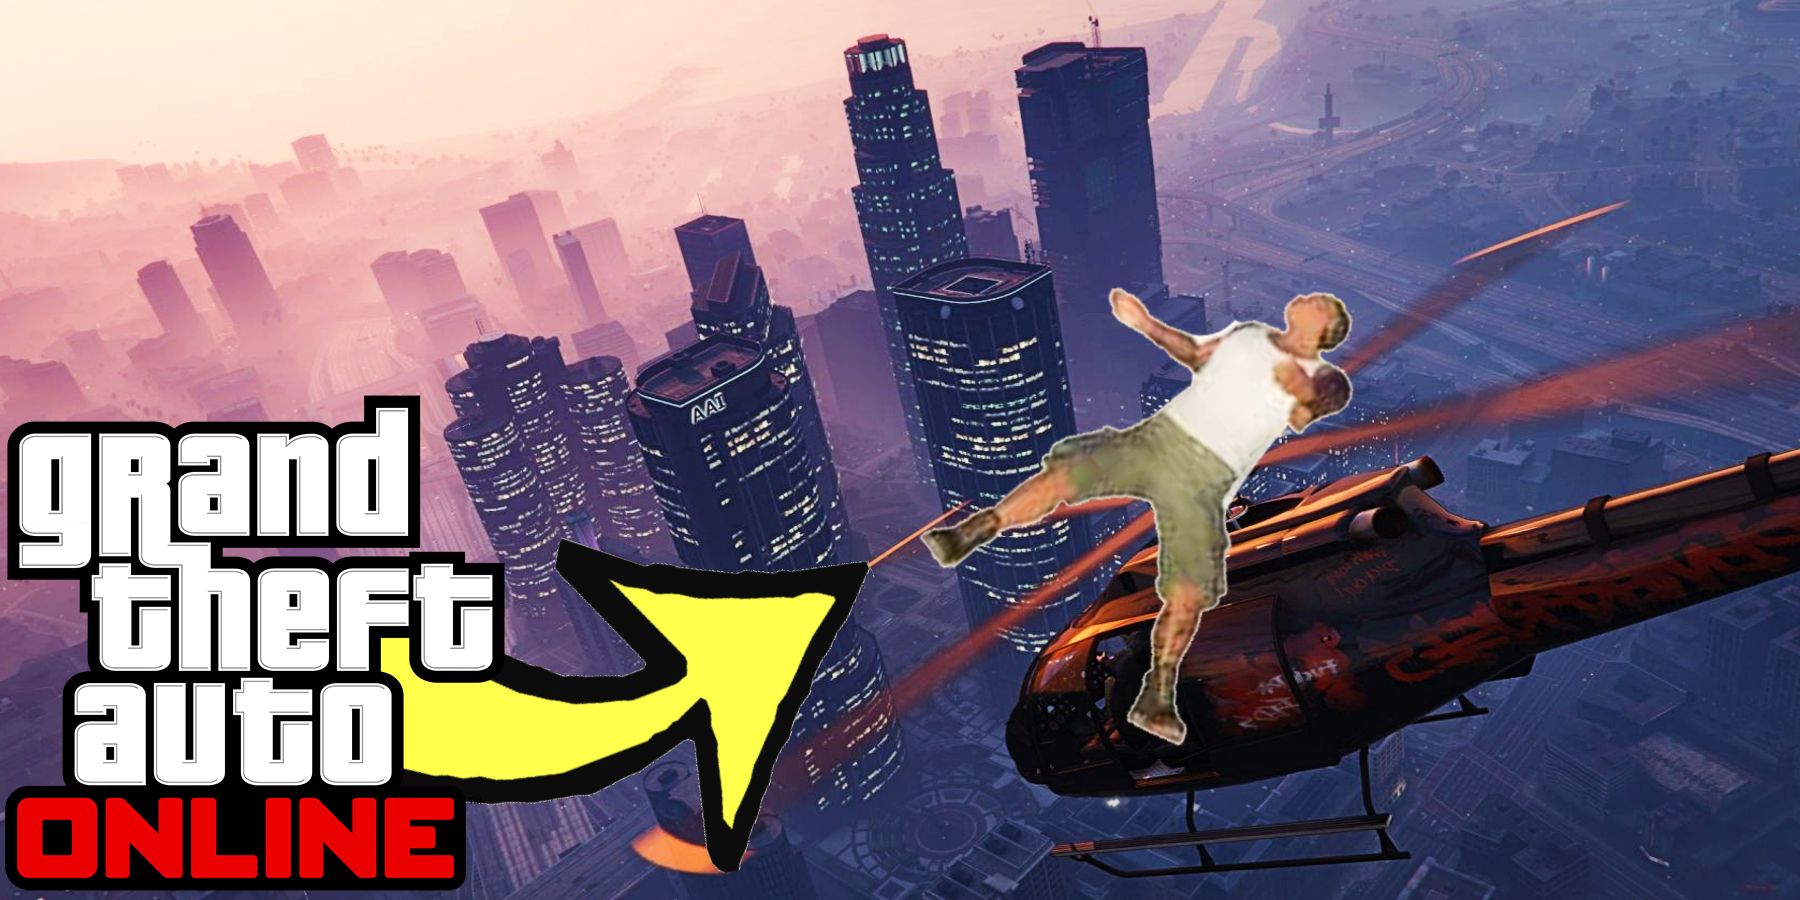 GTA Online Glitch Makes Player Spin Like Helicopter Rotor Blades in